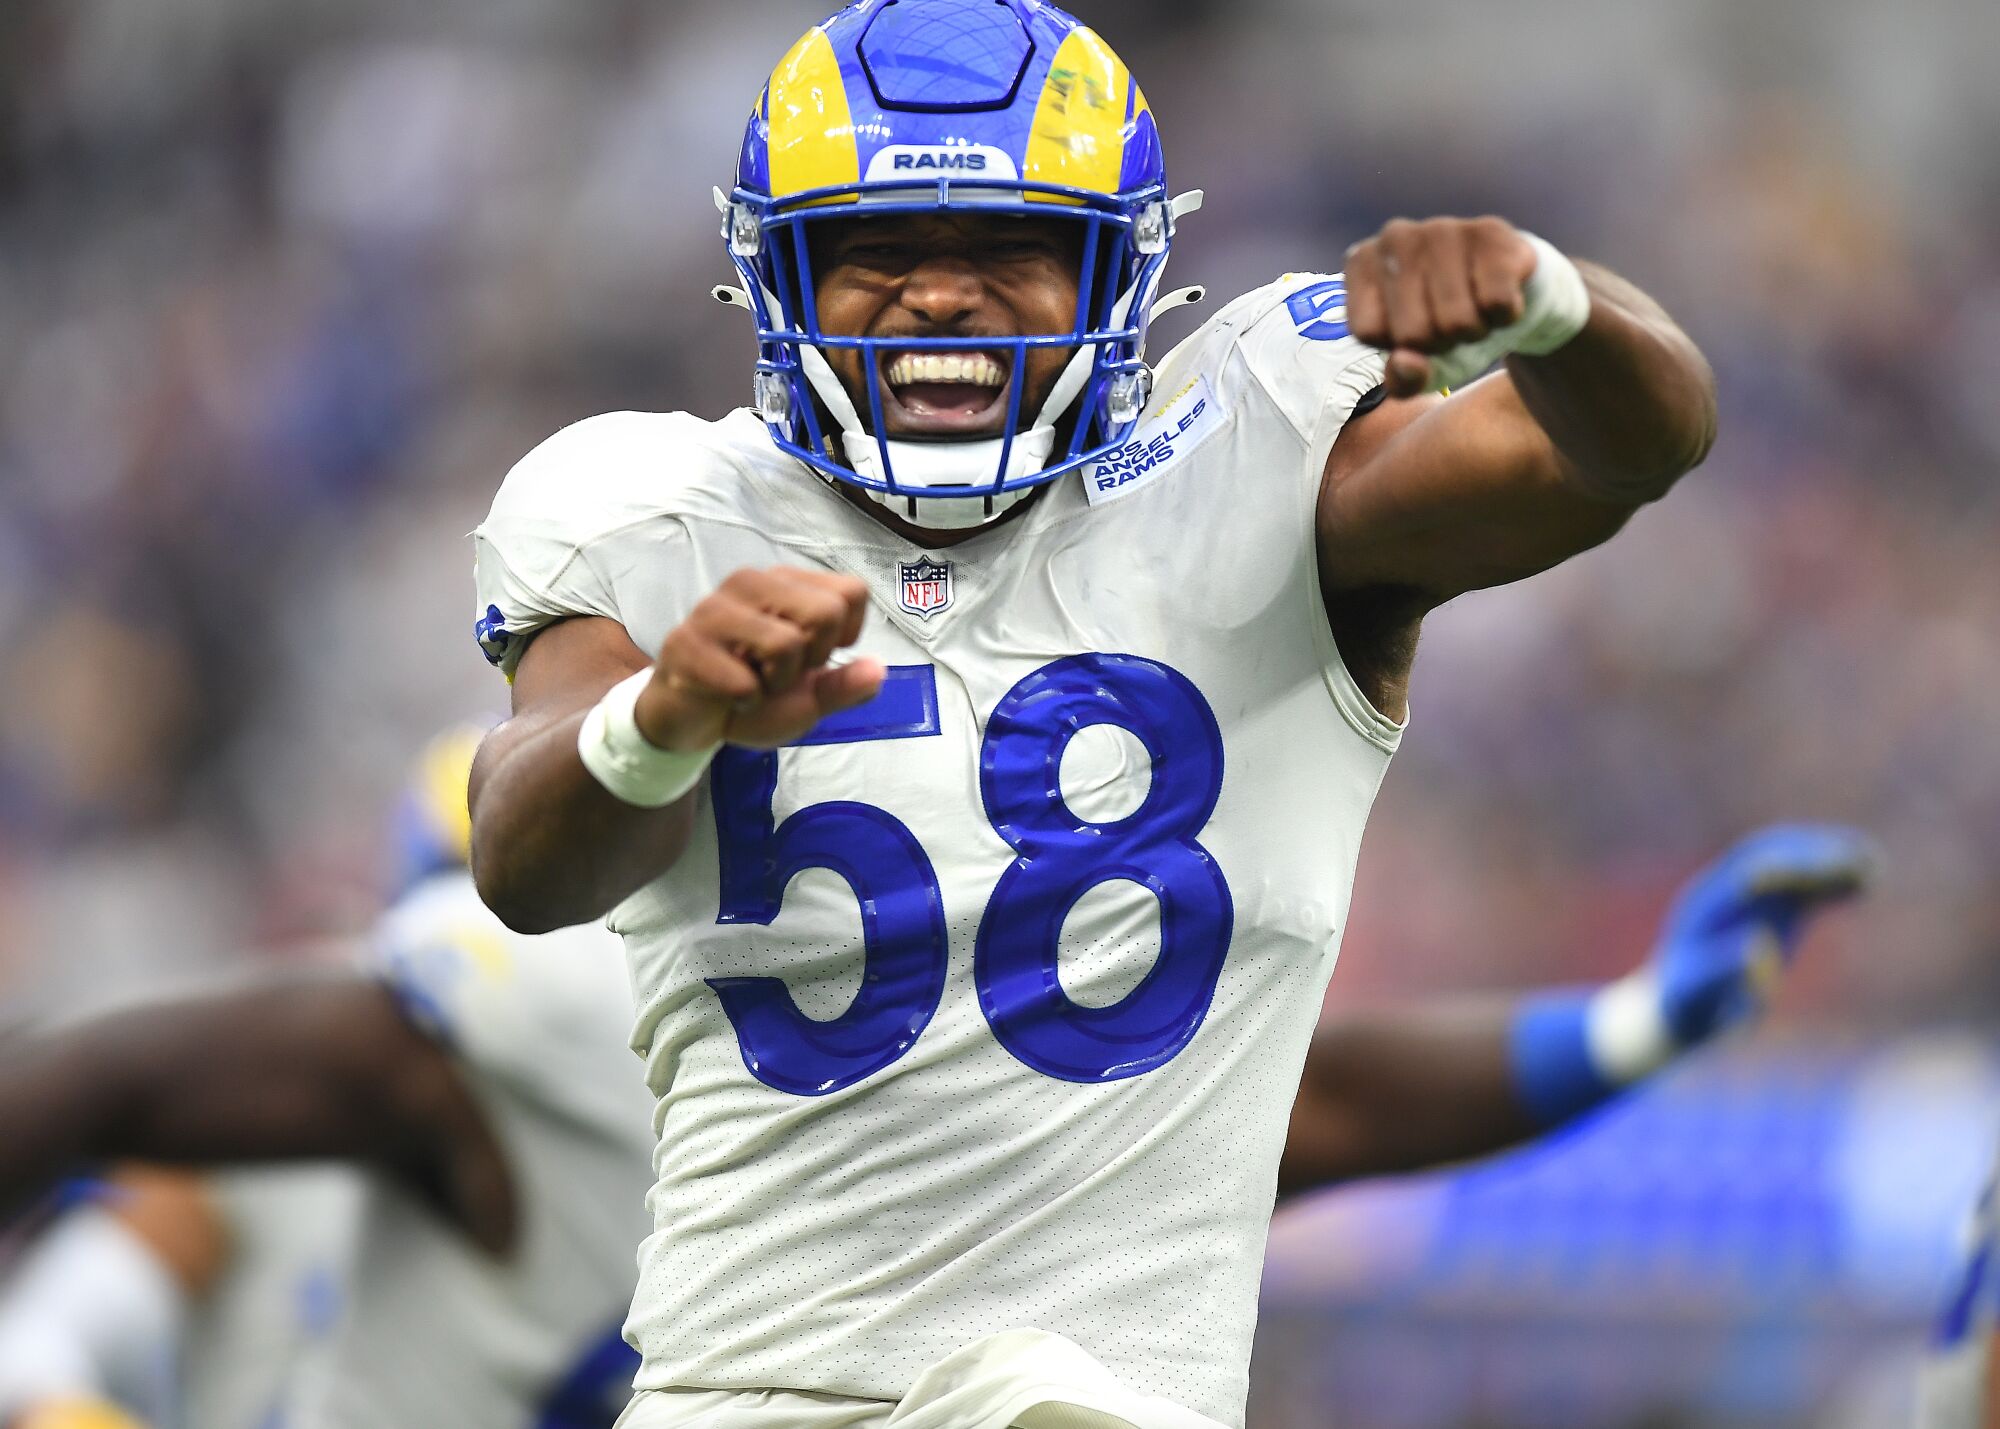 Rams linebacker Justin Hollins celebrates after stopping the Buccaneers on third down.